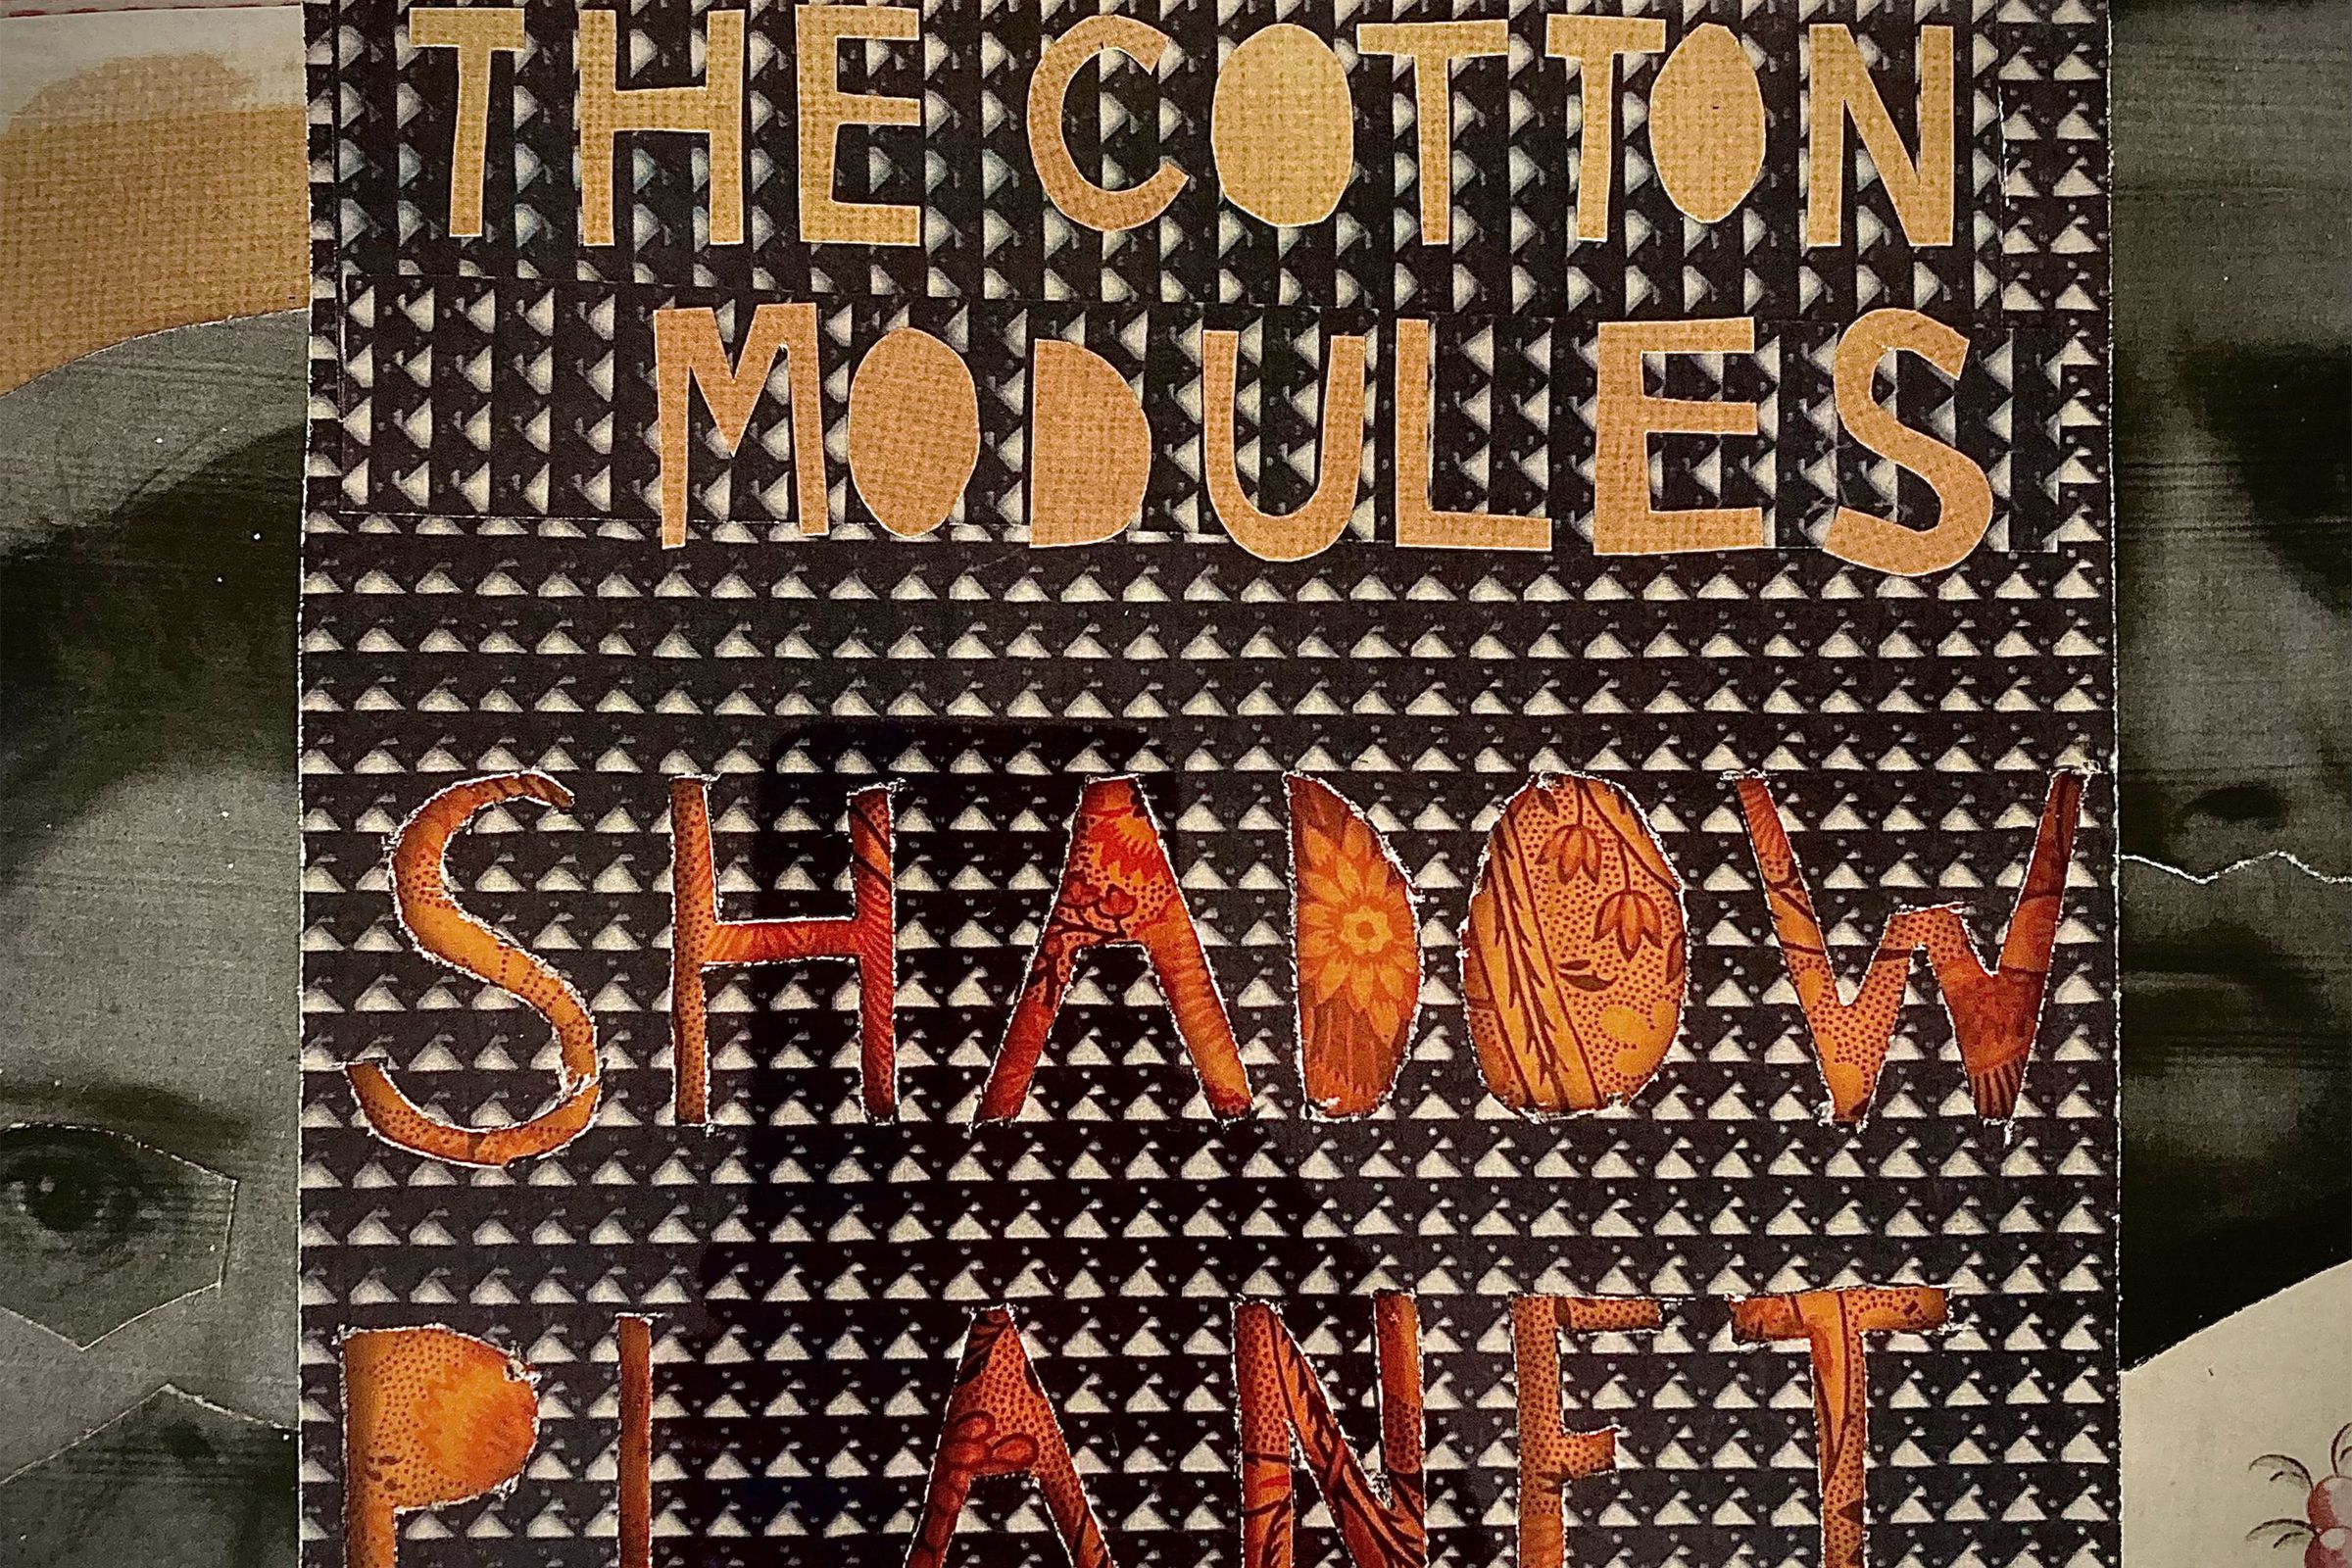 ‘Shadow Planet’ was made by Robin Sloan and Jesse Solomon Clark, aka The Cotton Modules, using OpenAI’s Jukebox AI music model. 